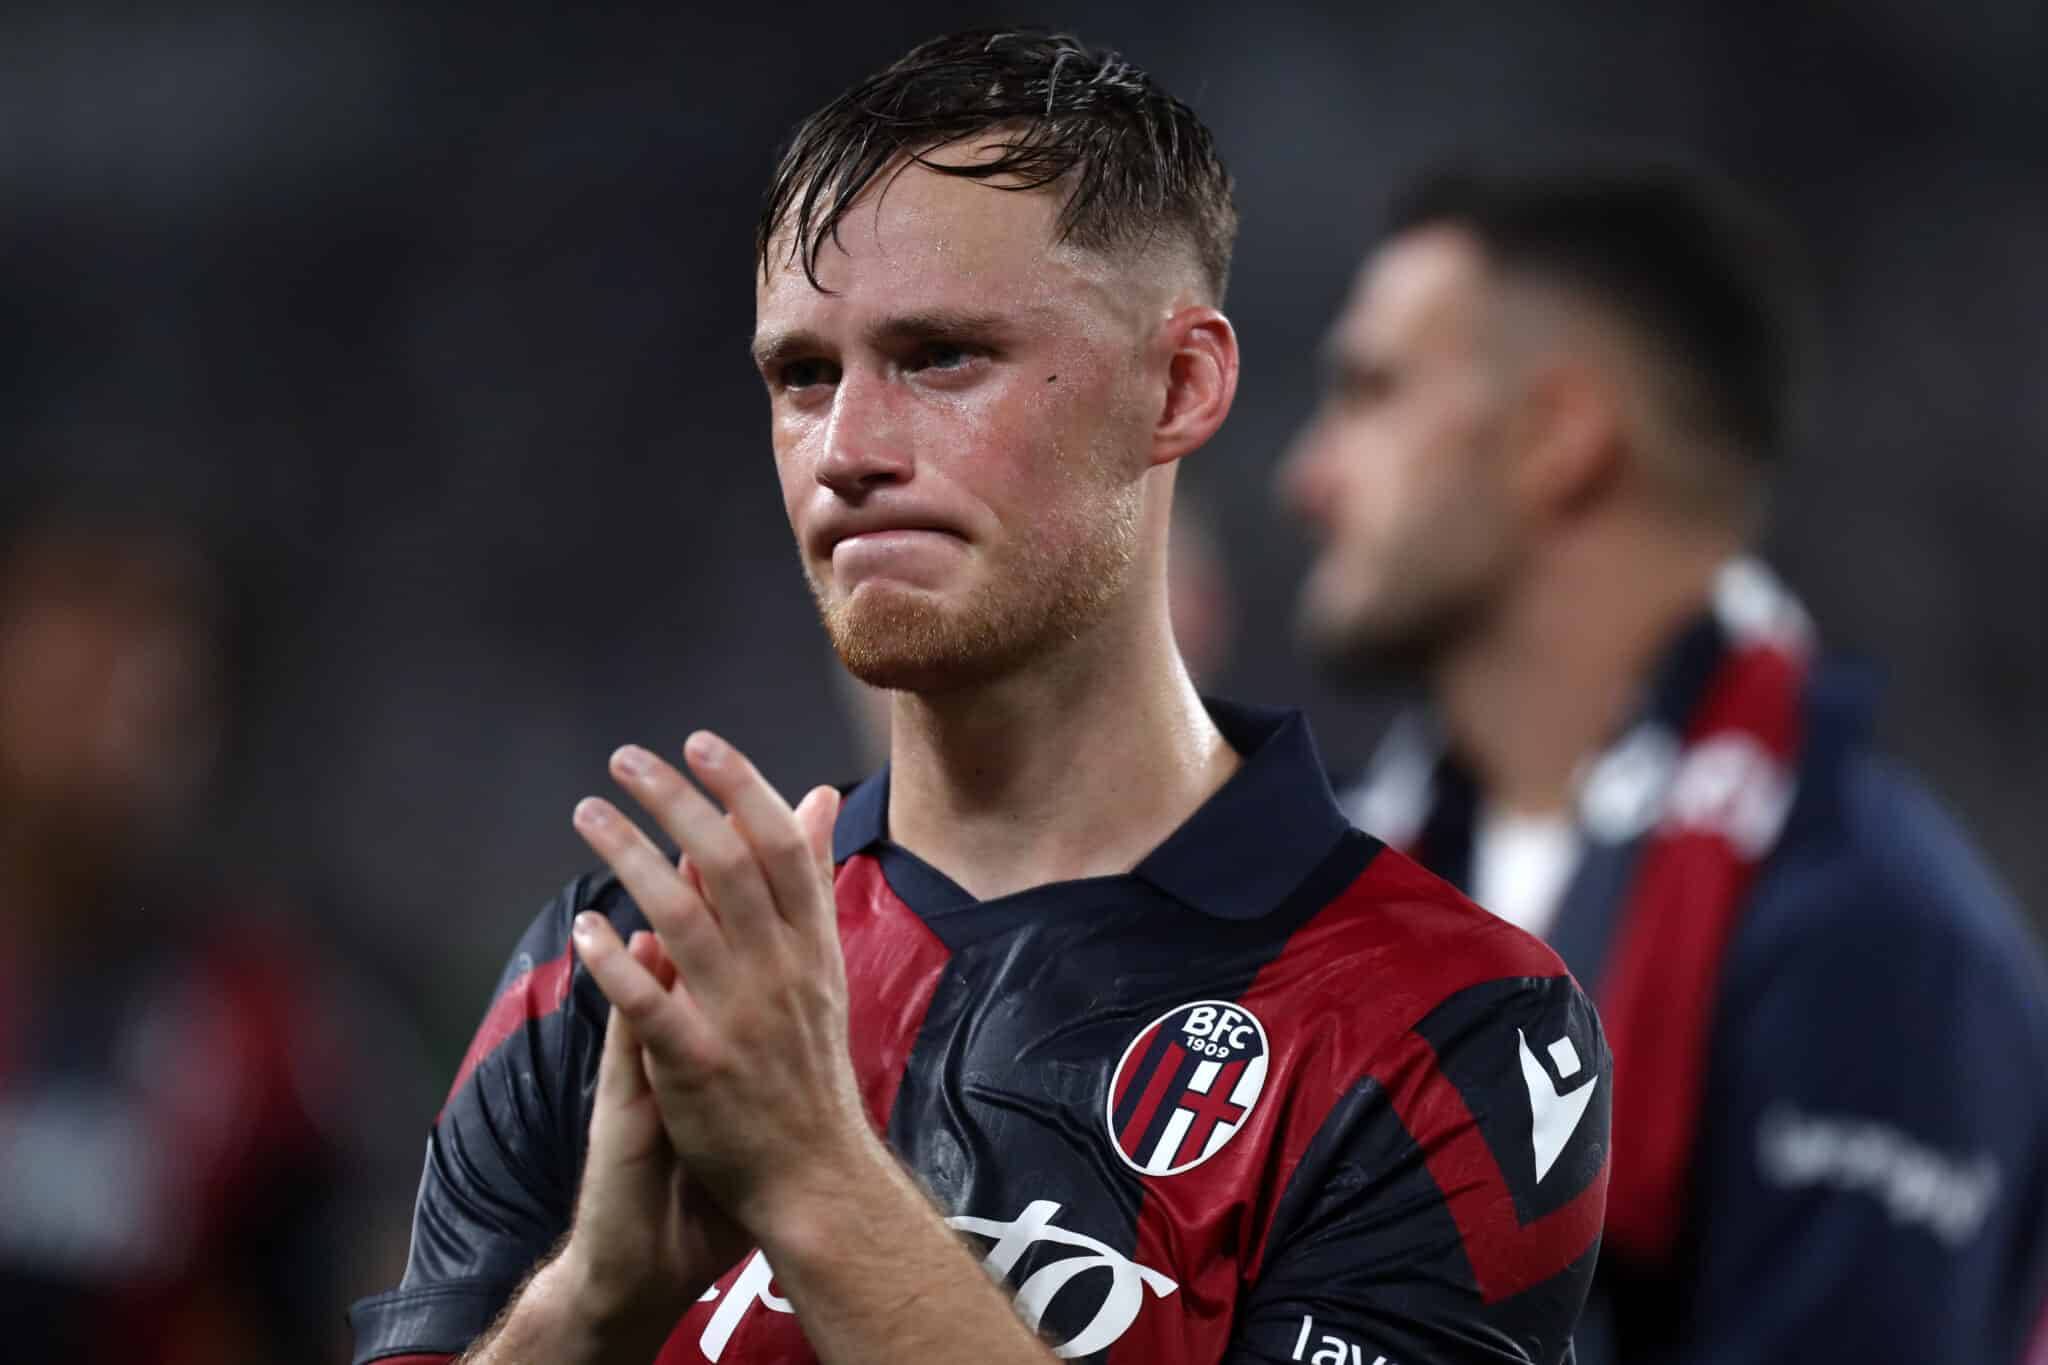 Inter are looking for a young defender and have laid eyes on Sam Beukema, who’s having a solid maiden Serie A season at Bologna.